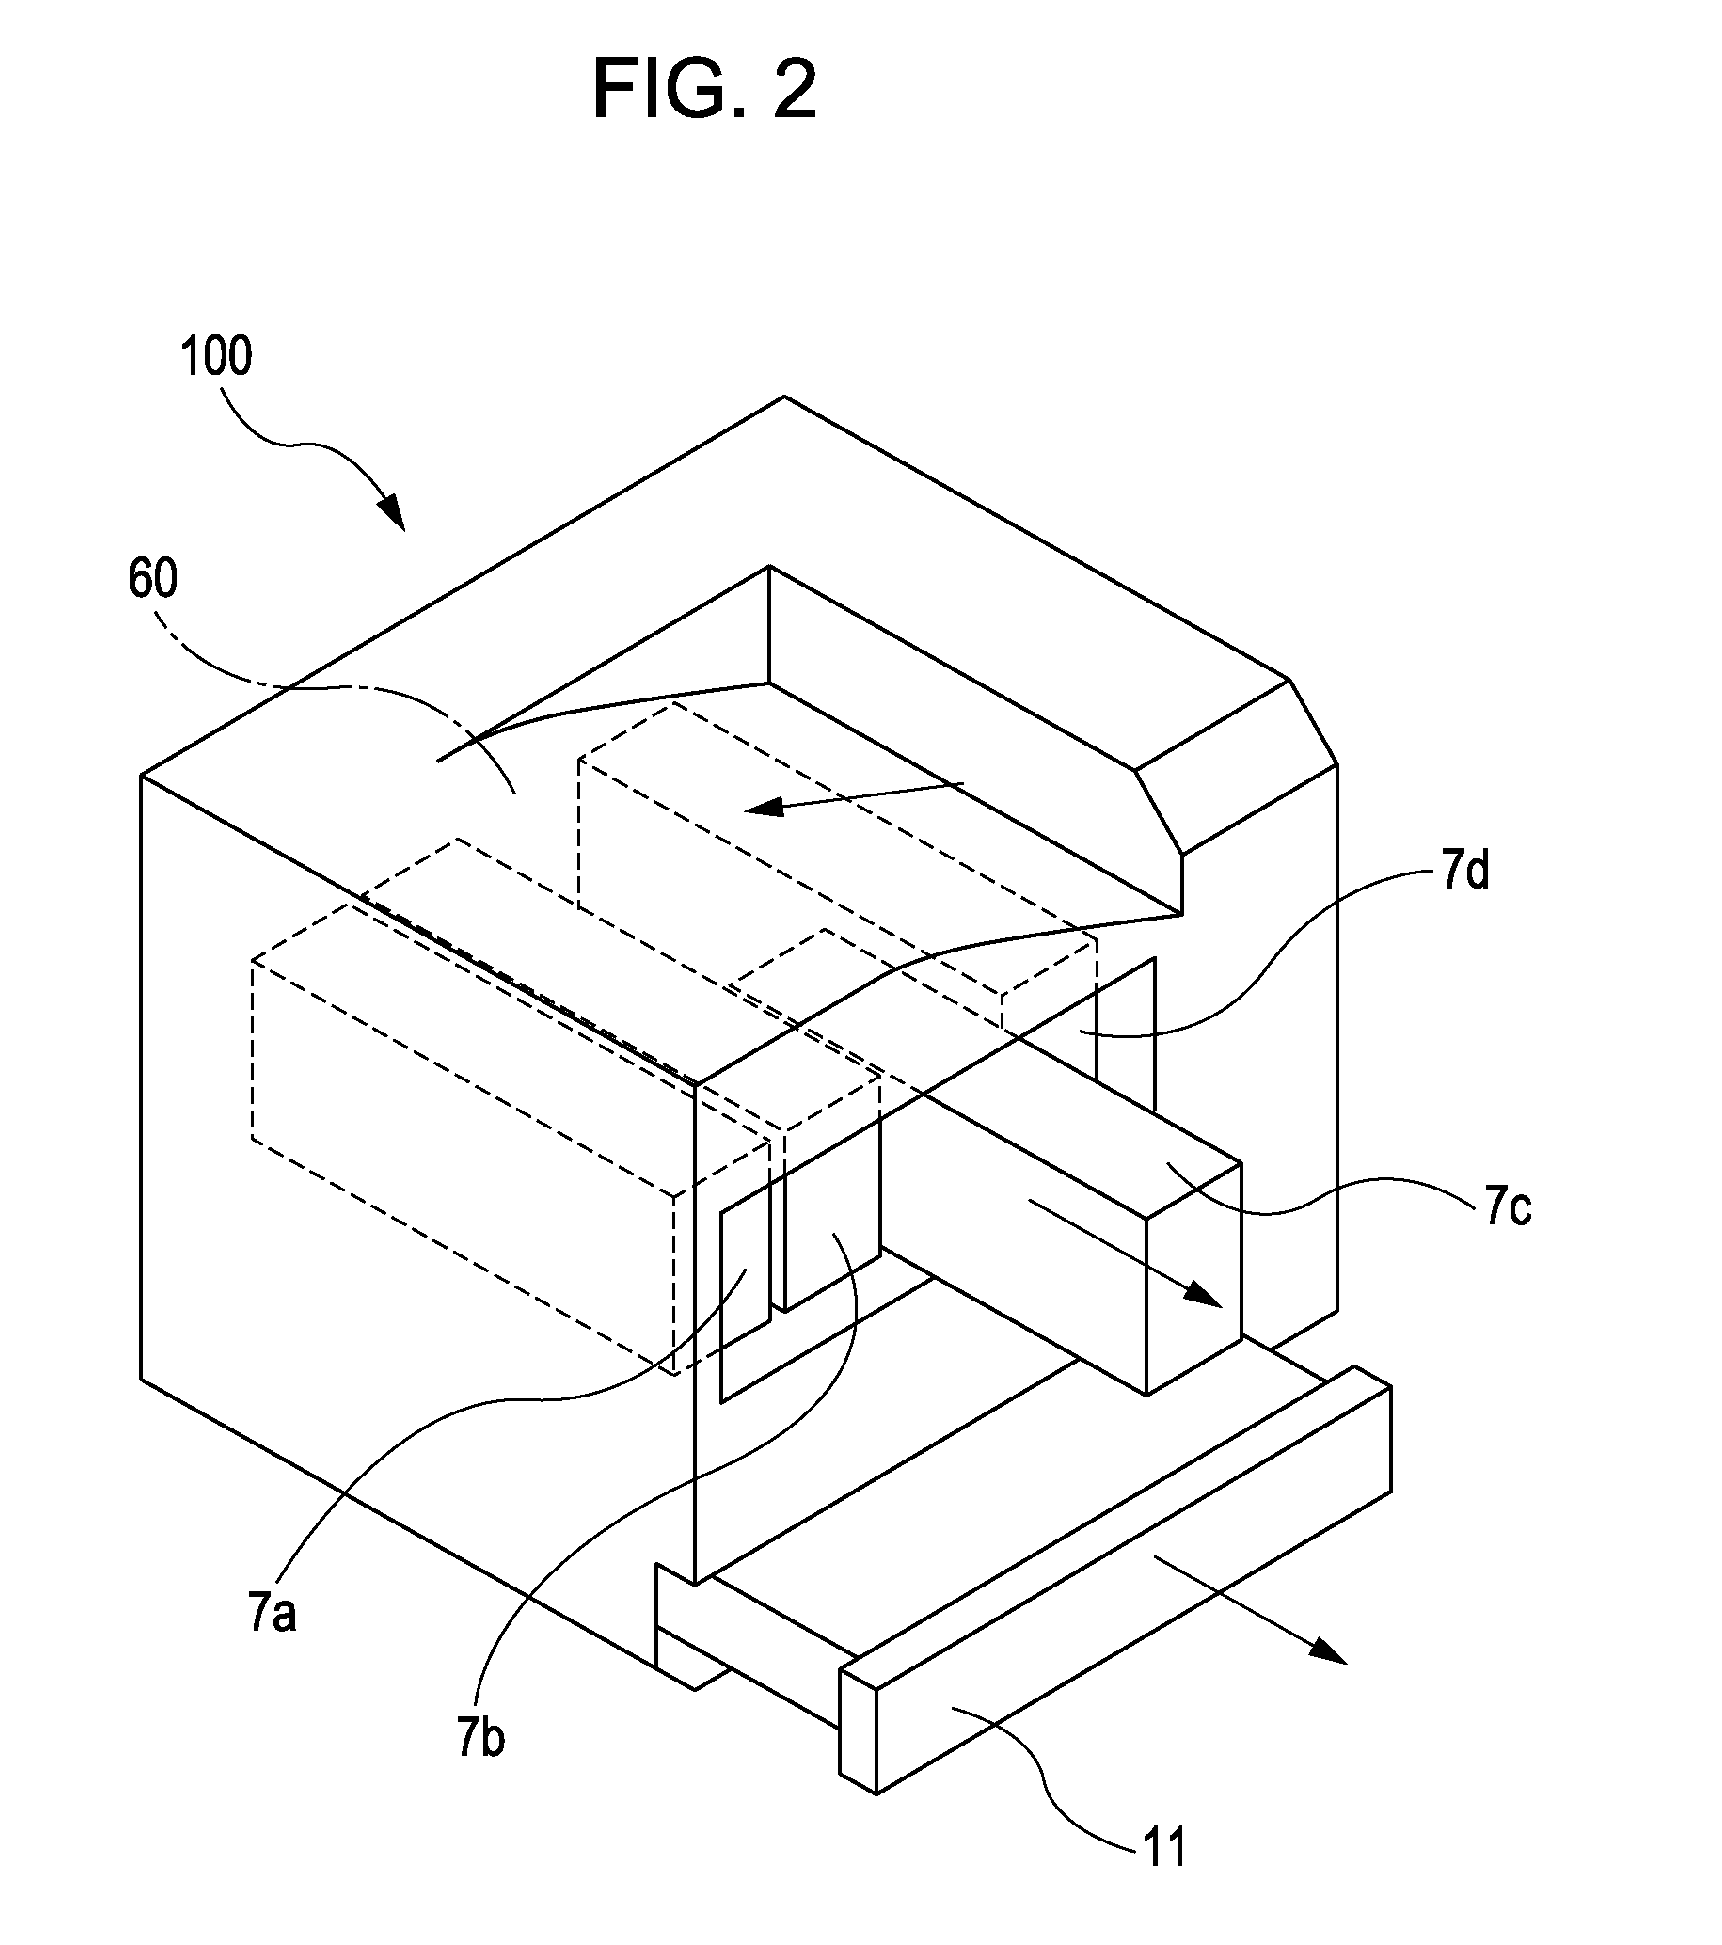 Image forming apparatus having a cleaning member configured to clean a transparent member of an optical device